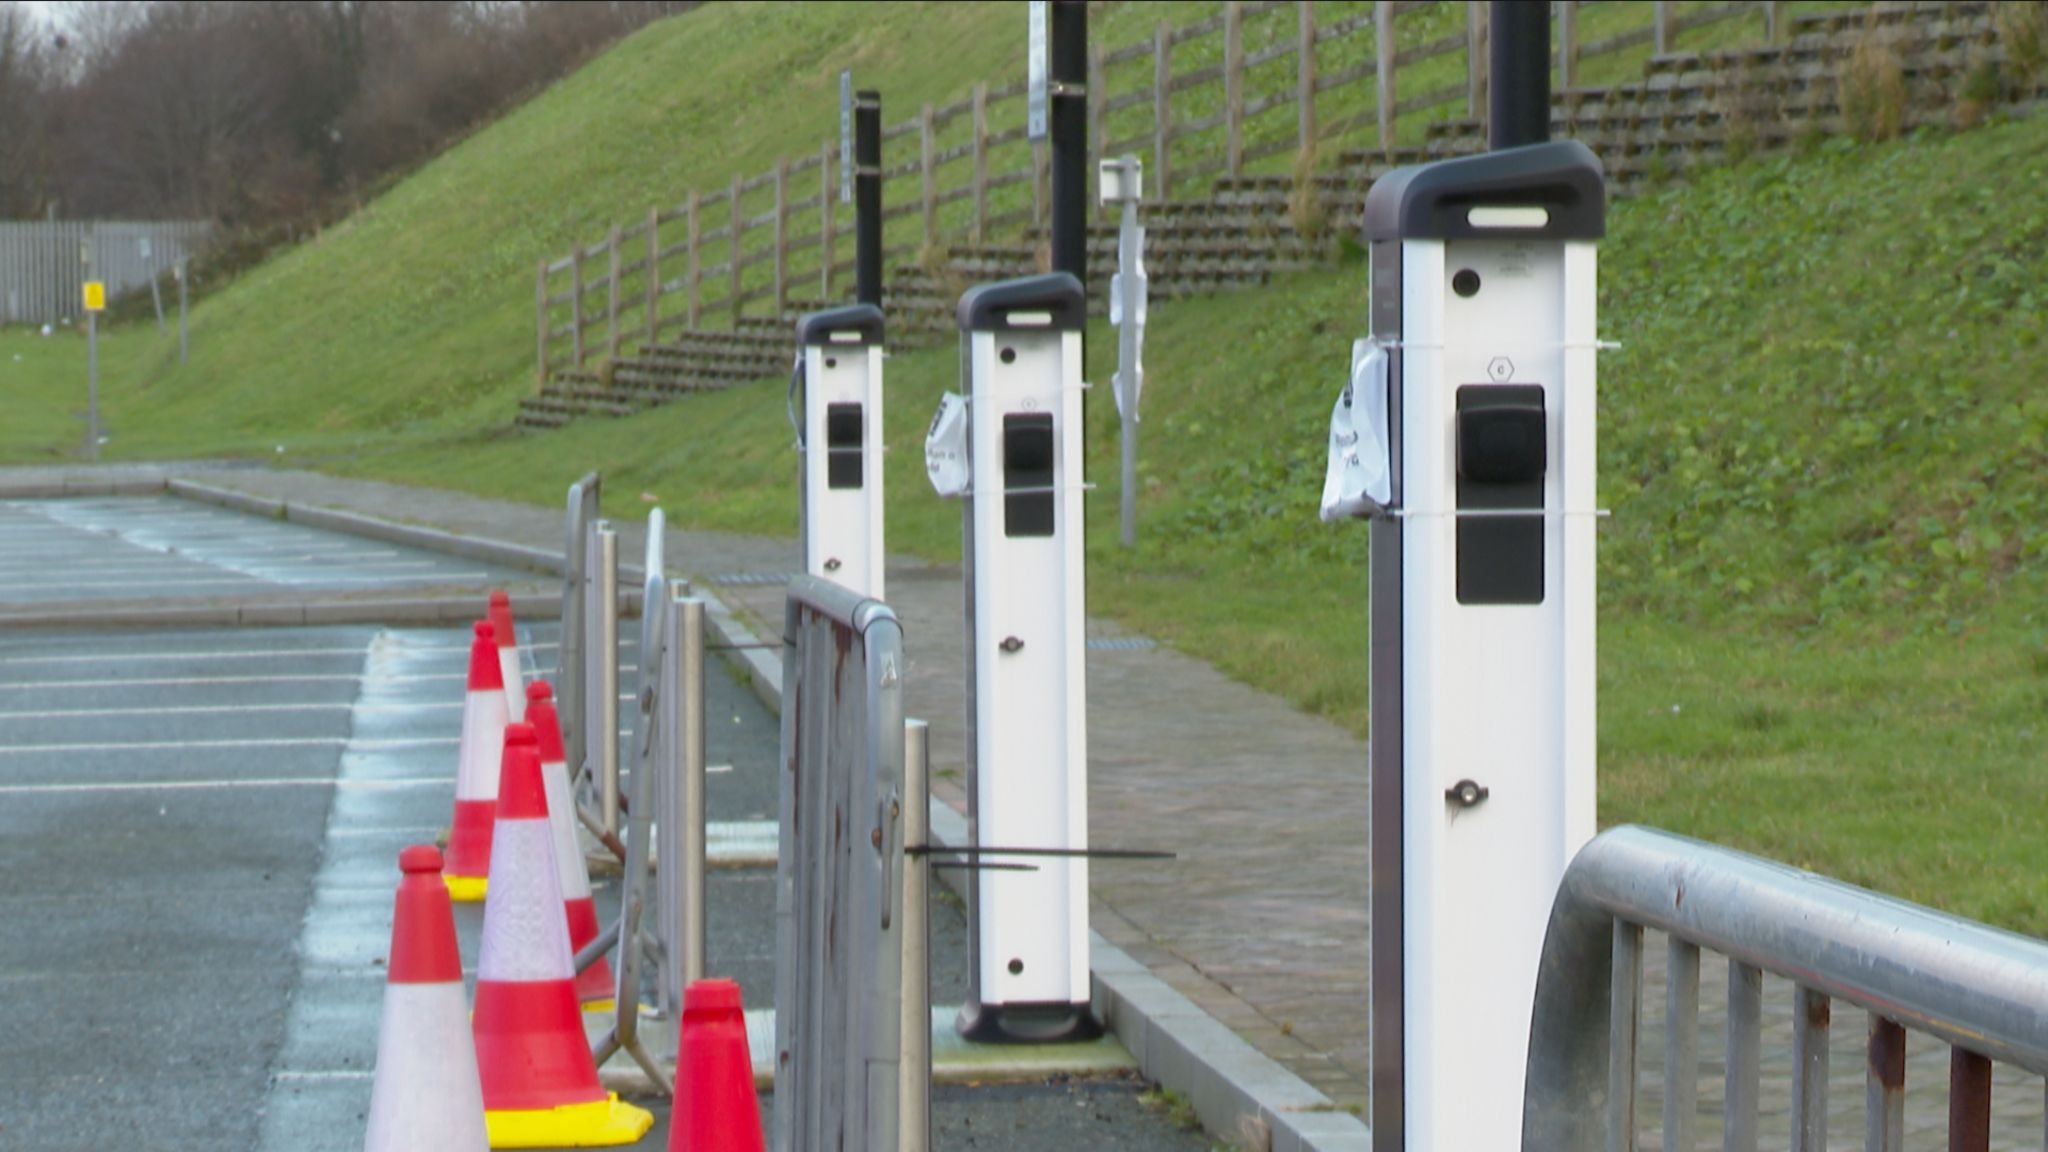 Unconnected chargers at Victoria Dock Shell car park in Caernarfon, coned and barriers in front, with "out of use" signs pinned to the charging points